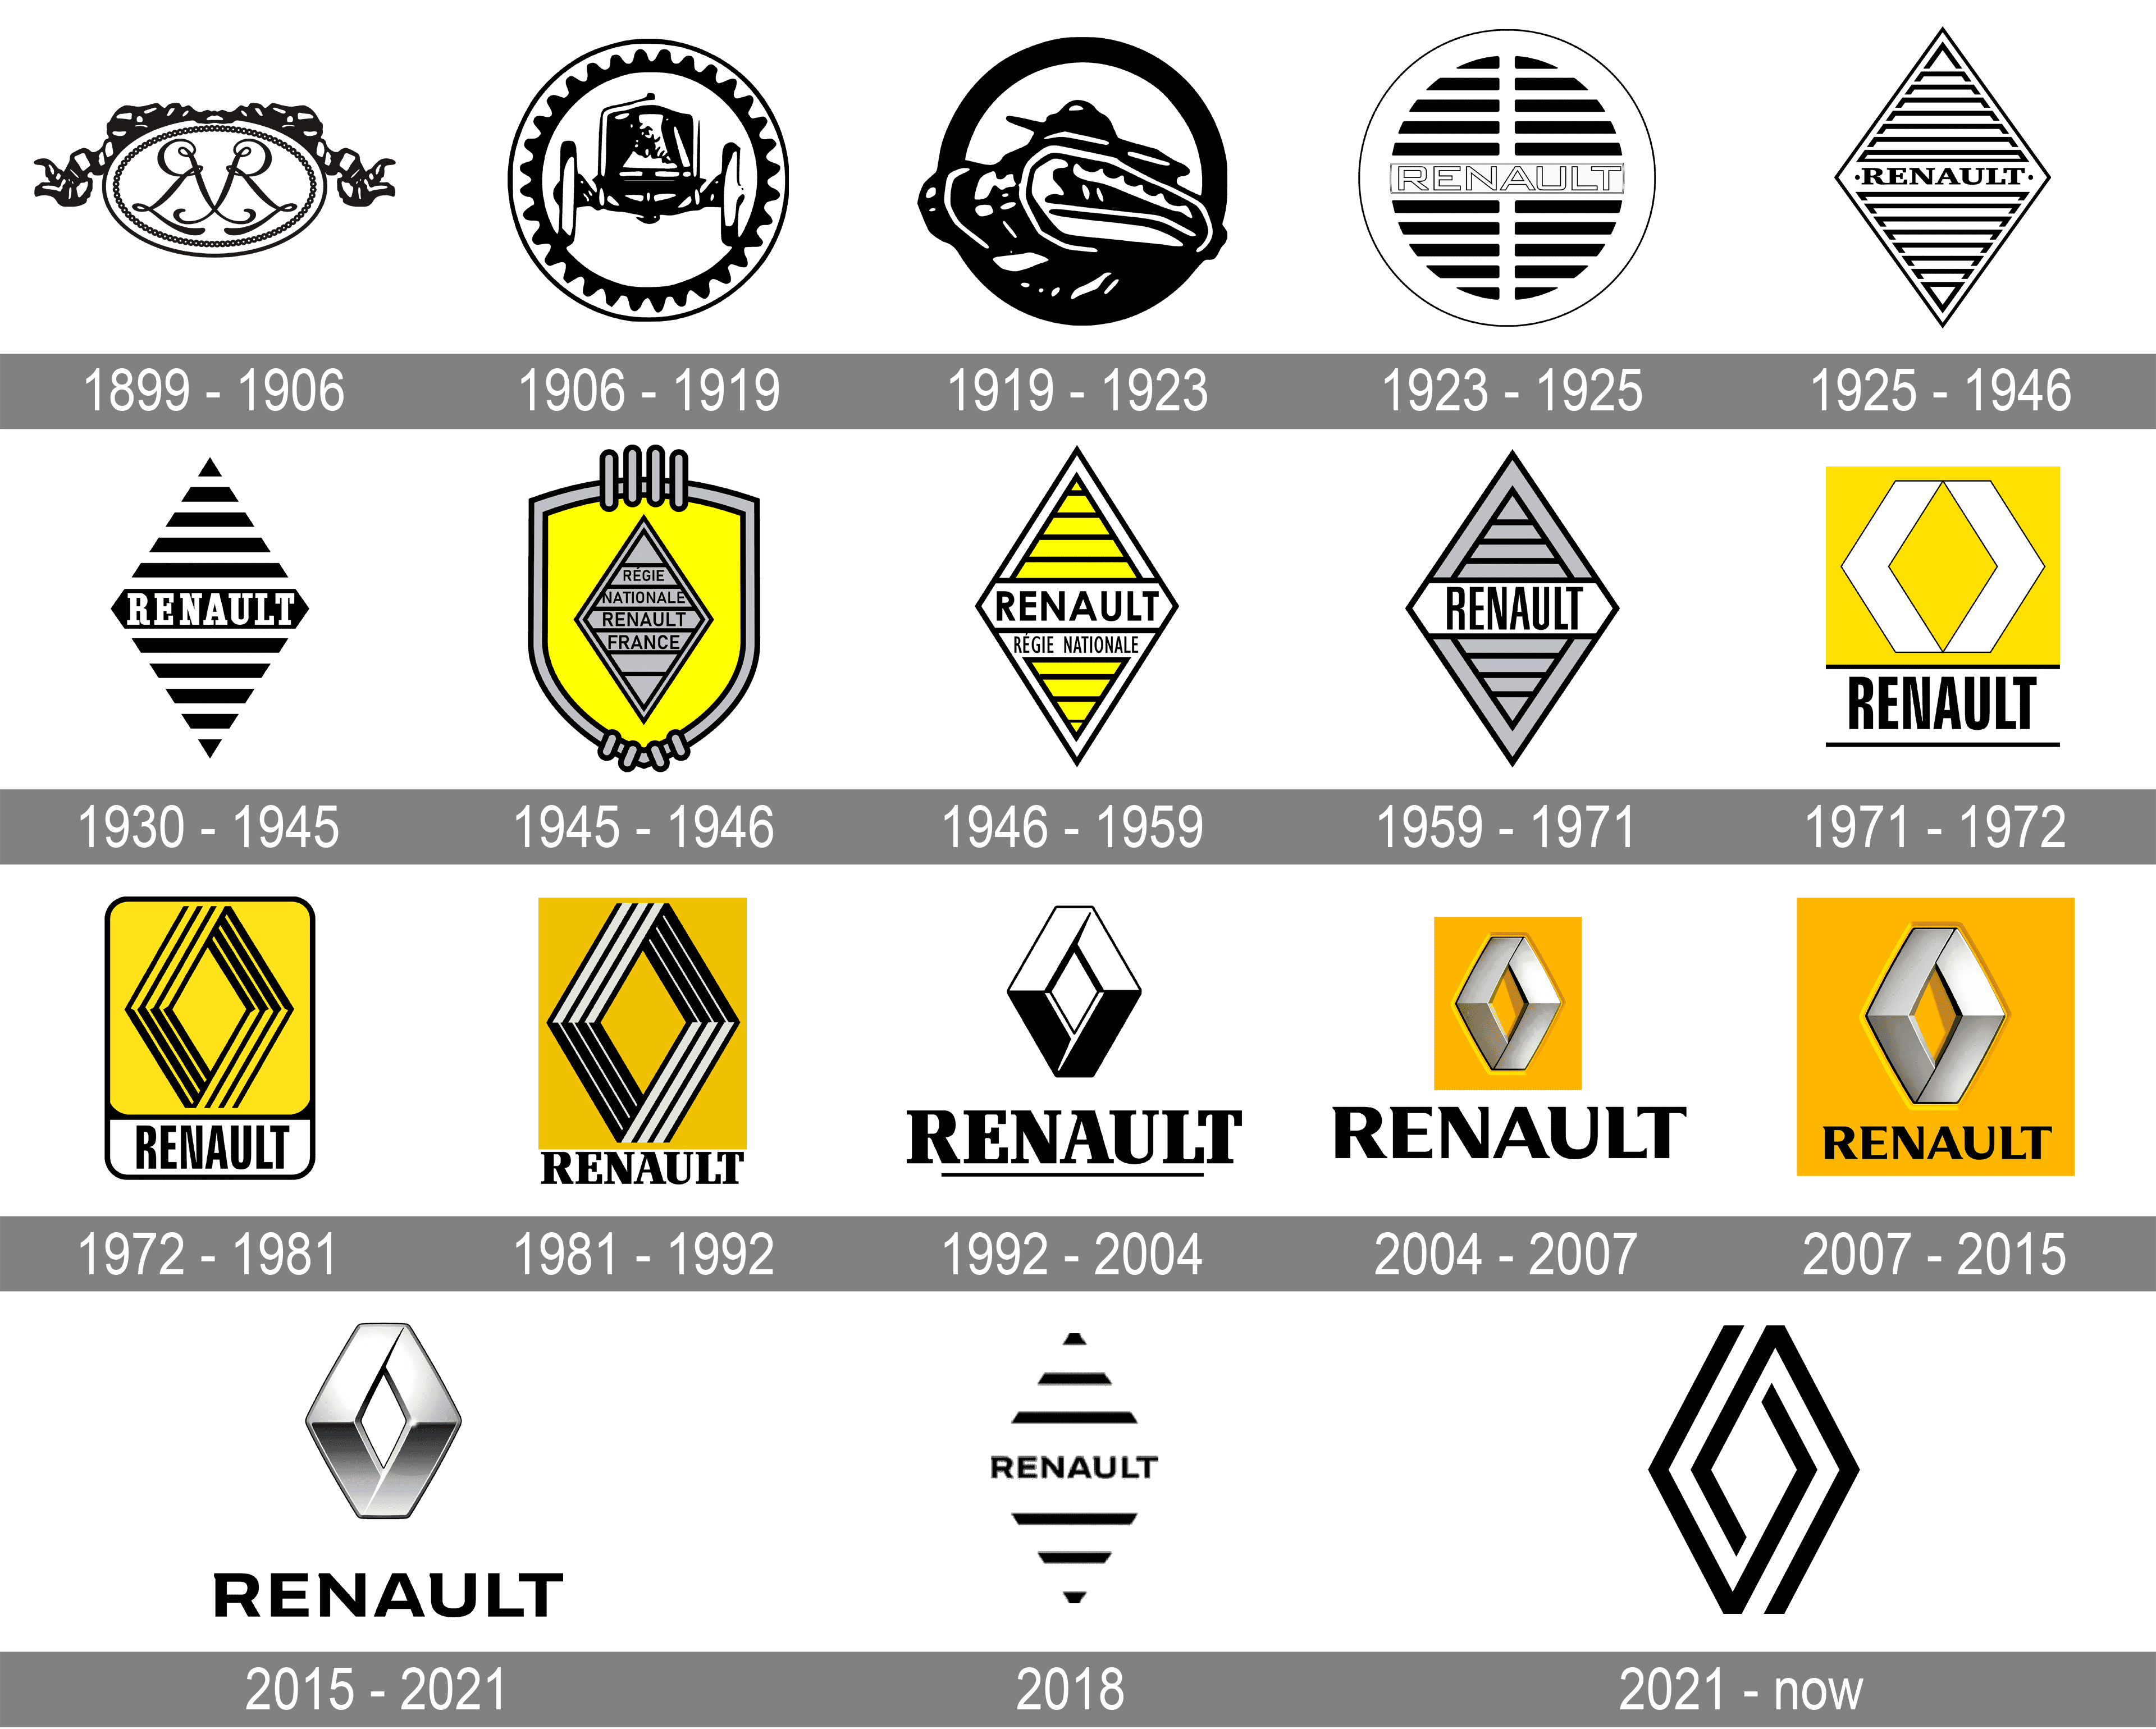 The History of Renault